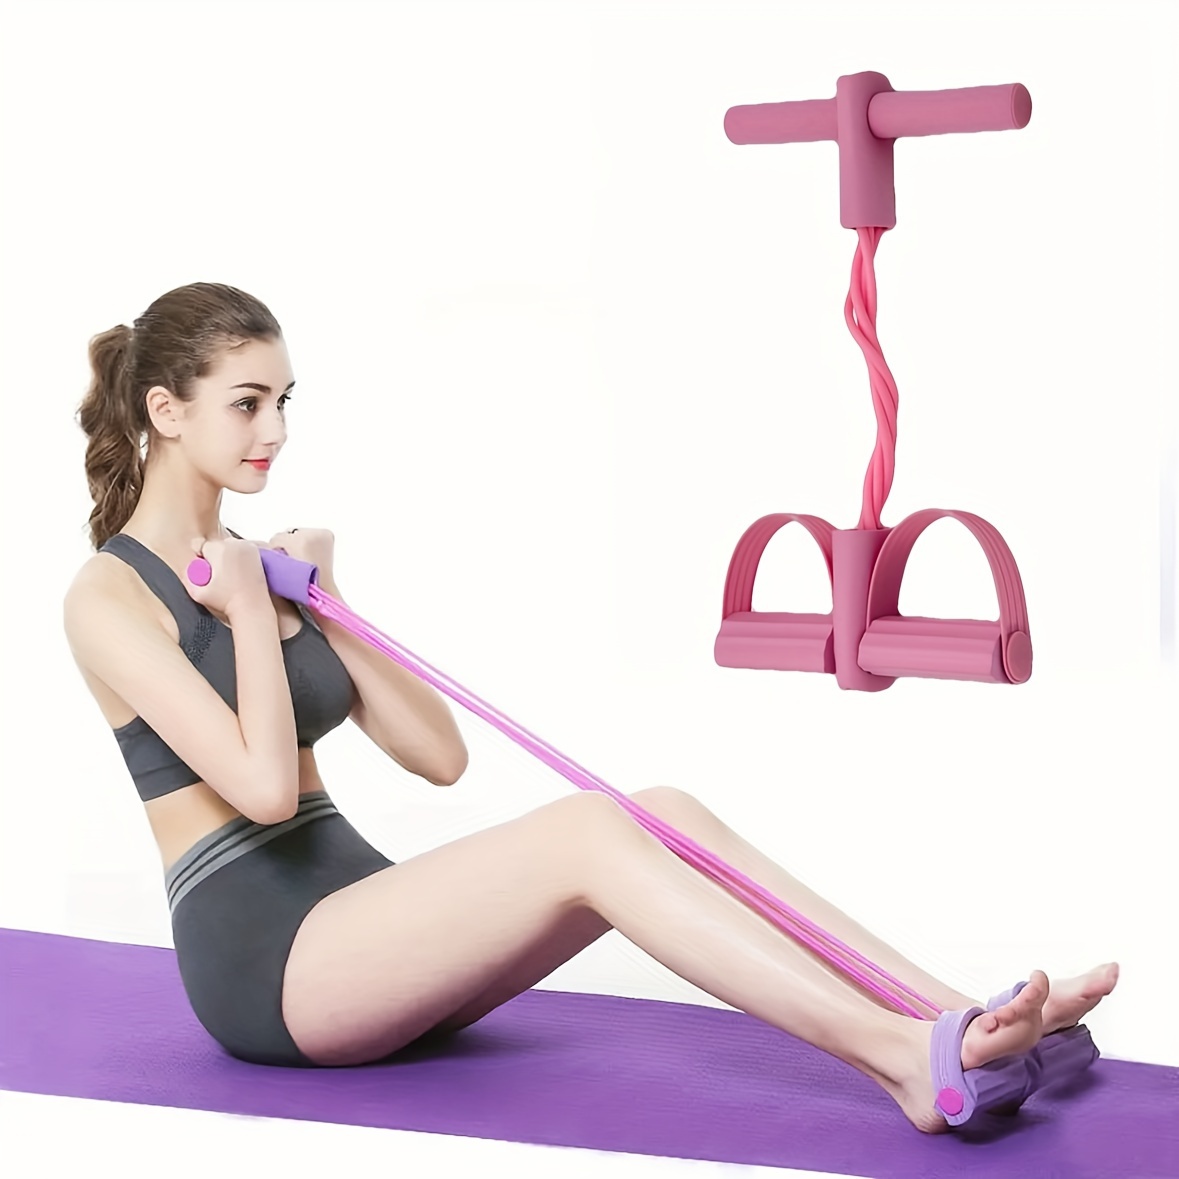 

1pc Leg Pedal Puller, Tpe Resistance Band, Suitable For Body Shaping, Sit-ups, Yoga Training